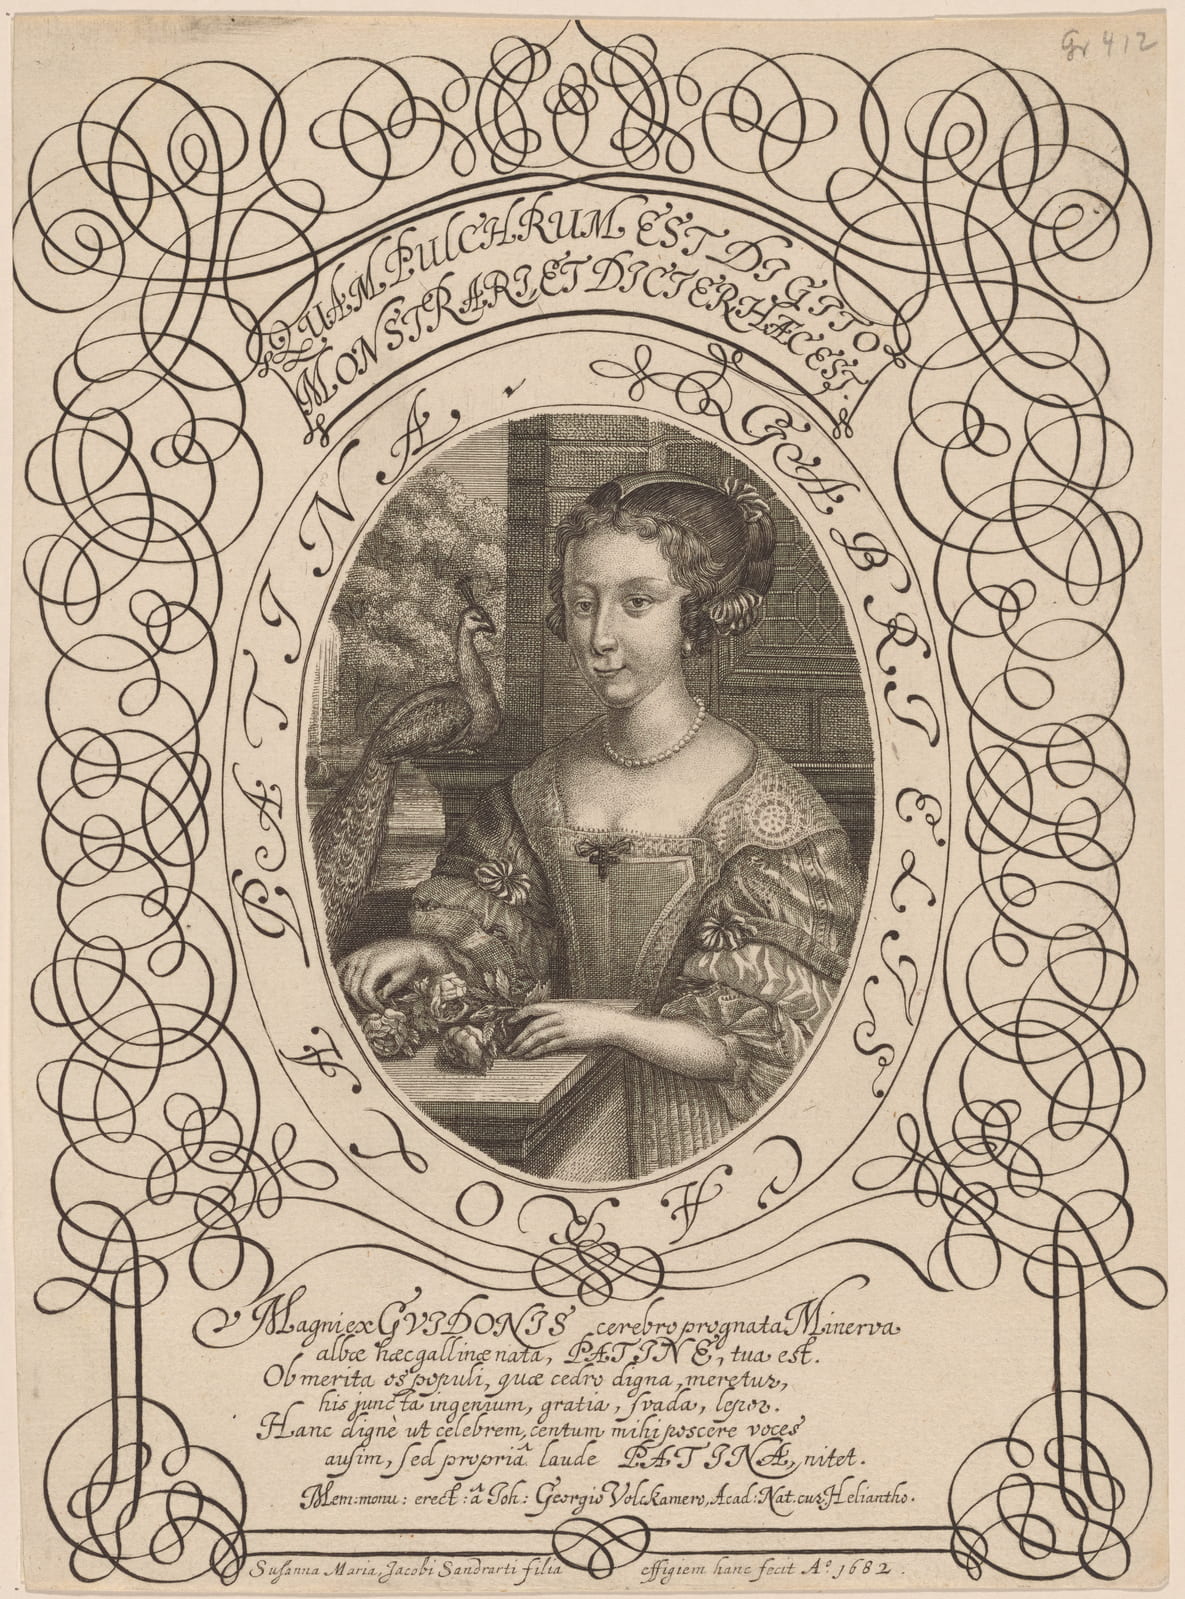 Sandrart, Susanna Maria von, 1658-1716. “Gabrielis Carola Patina” 1682. The Miriam and Ira D. Wallach Division of Art, Prints and Photographs: Print Collection, The New York Public Library.